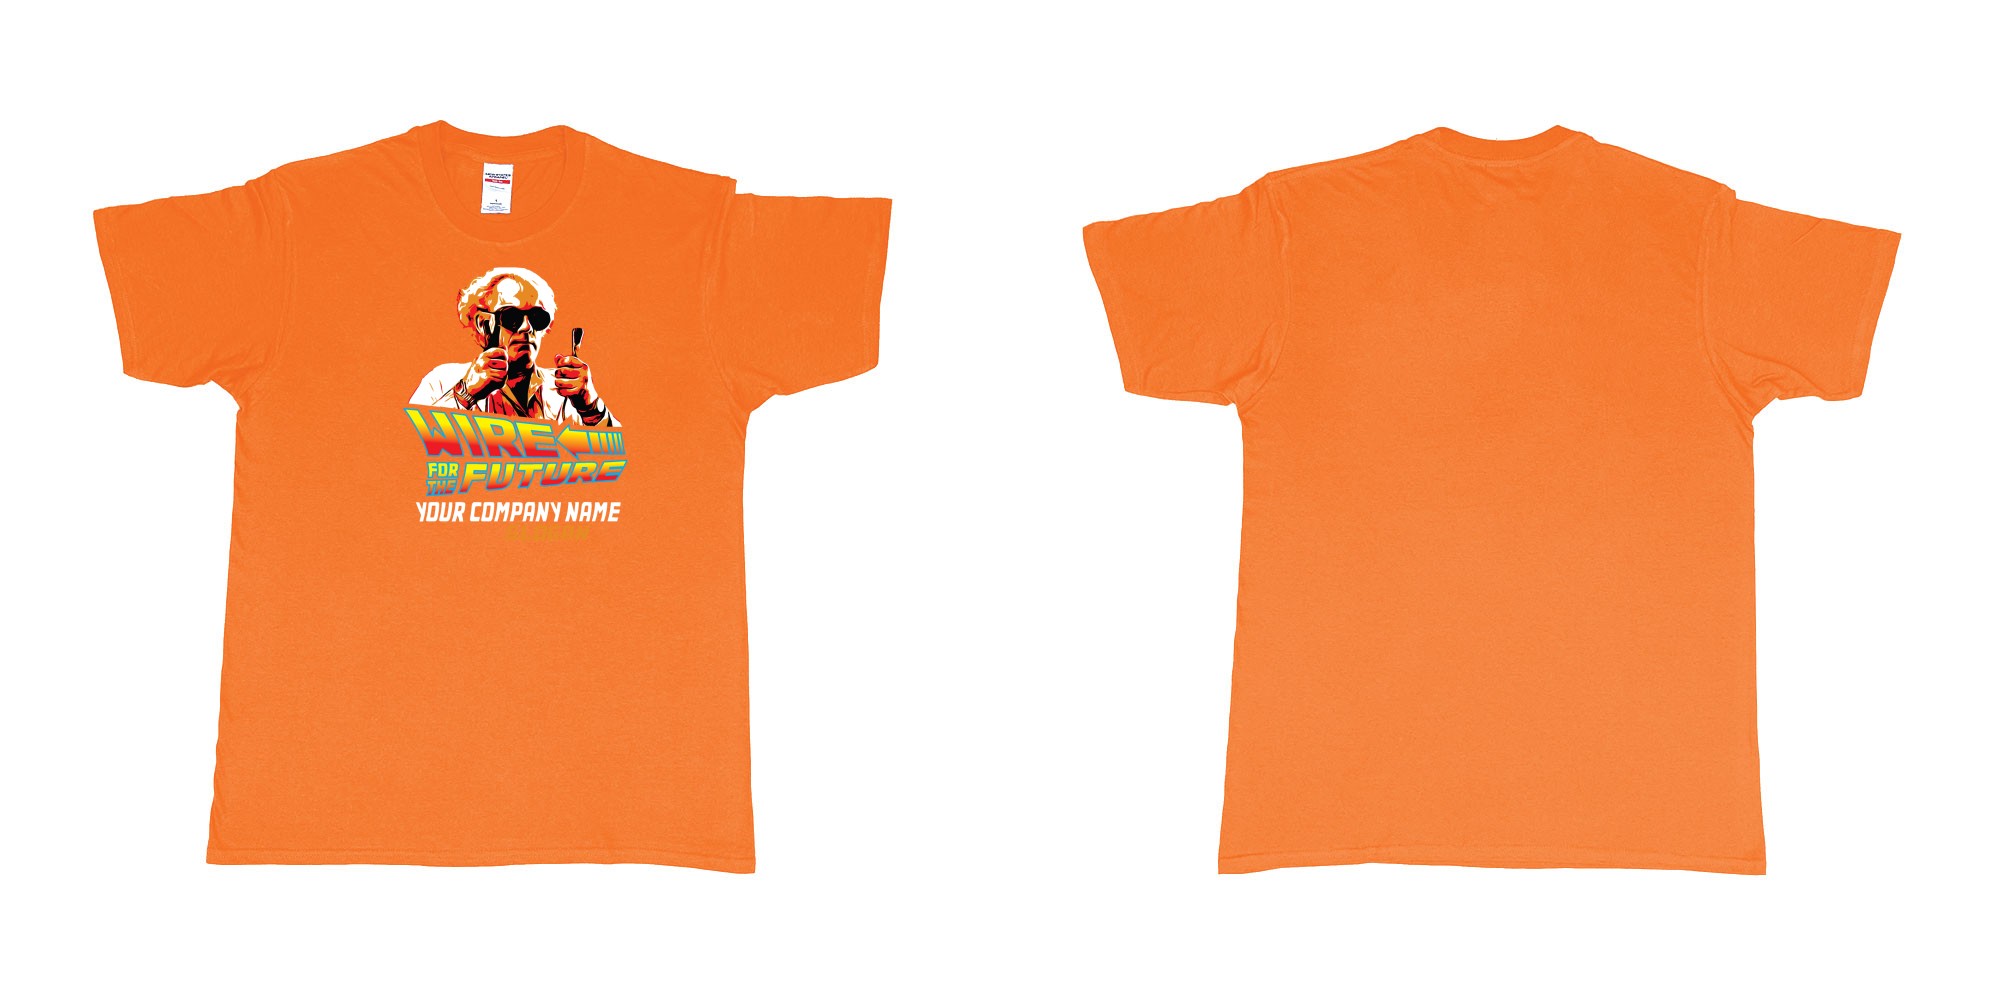 Custom tshirt design wire for the future back to the future electrician sparky in fabric color orange choice your own text made in Bali by The Pirate Way